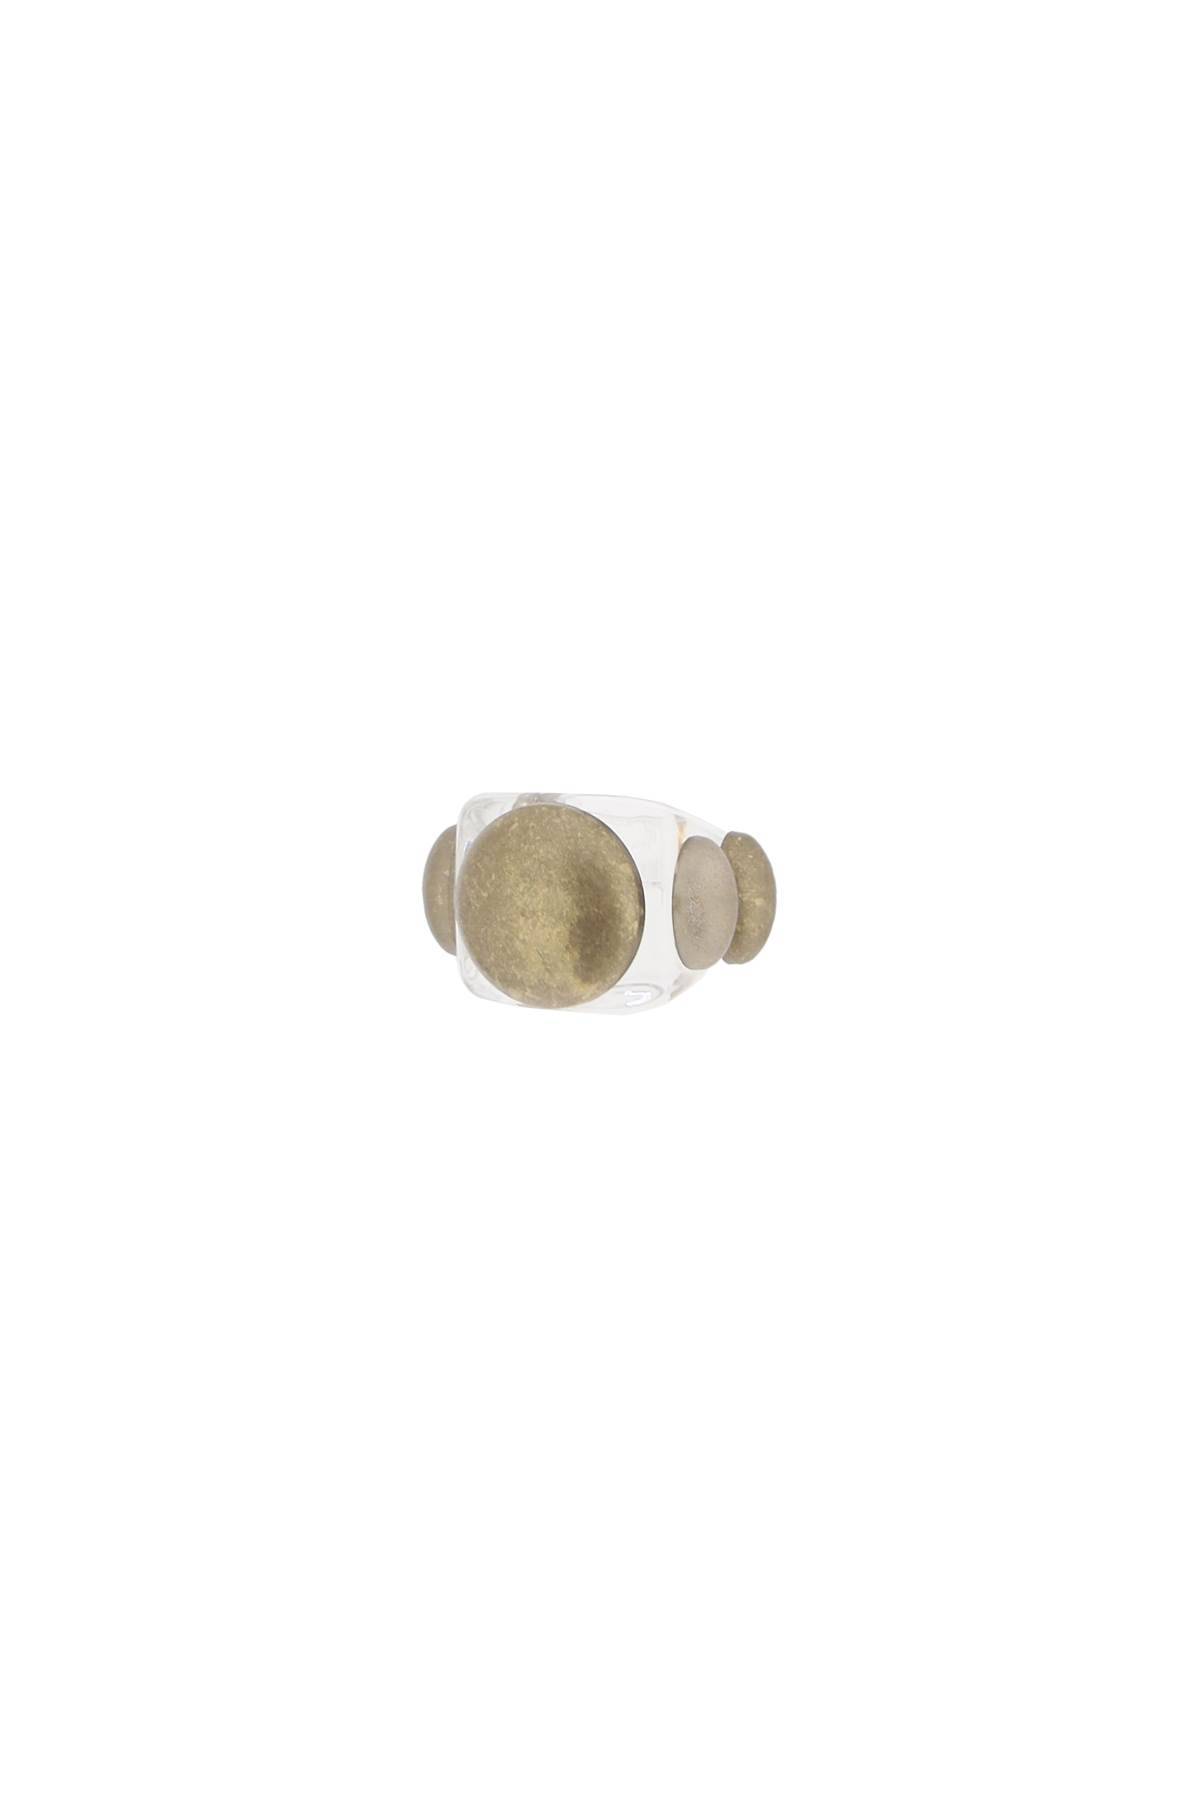 La Manso Crystal Aged Gold Ring In Brown,gold